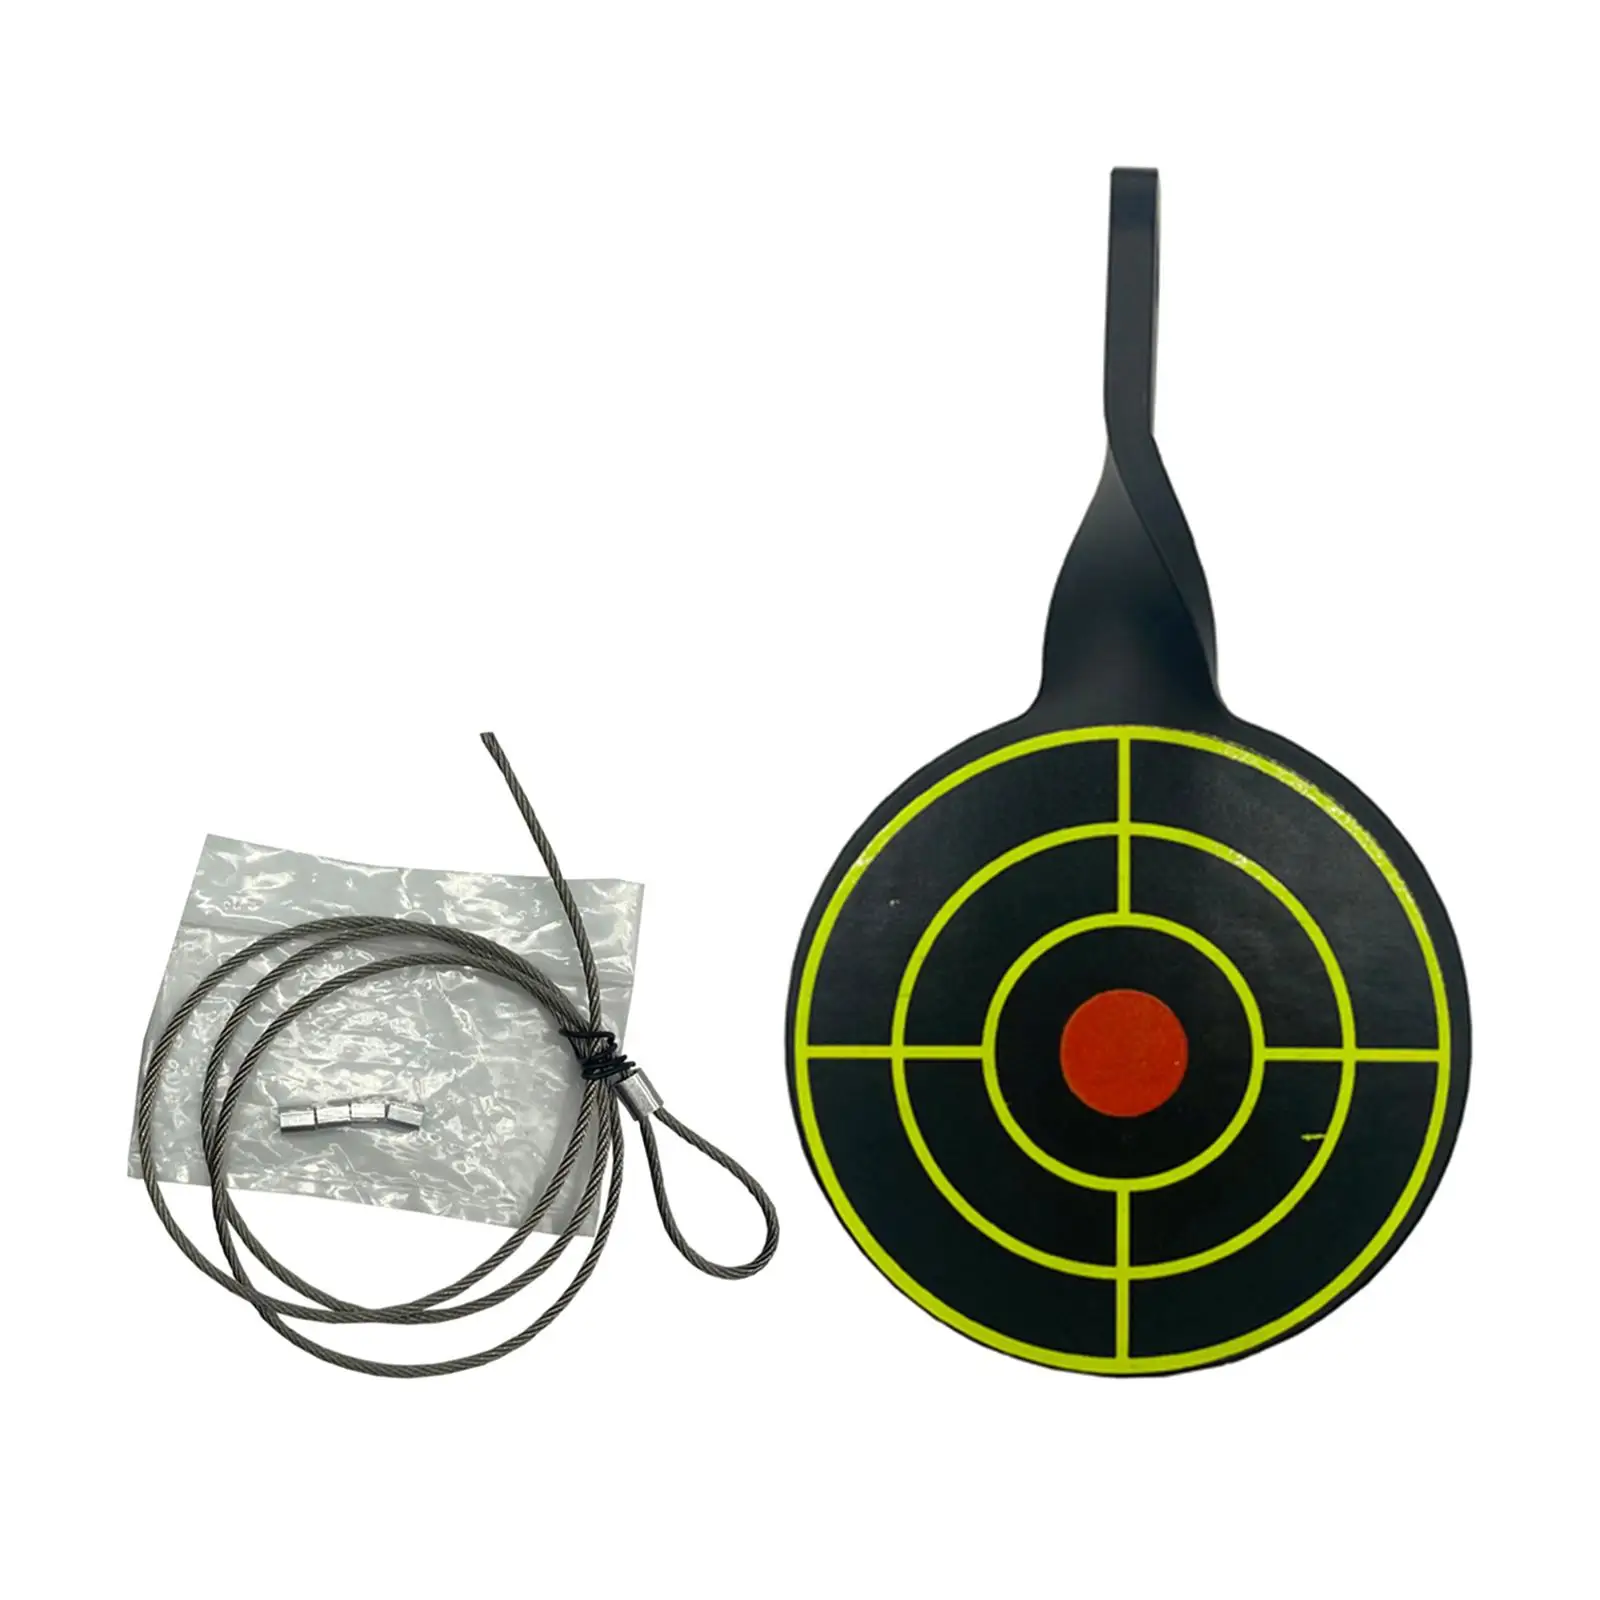 Diameter 8cm Shooting Target Stainless Steel Targets Hunting Catapult Paintball Archery Bow Training Target Hunting Tool Accs